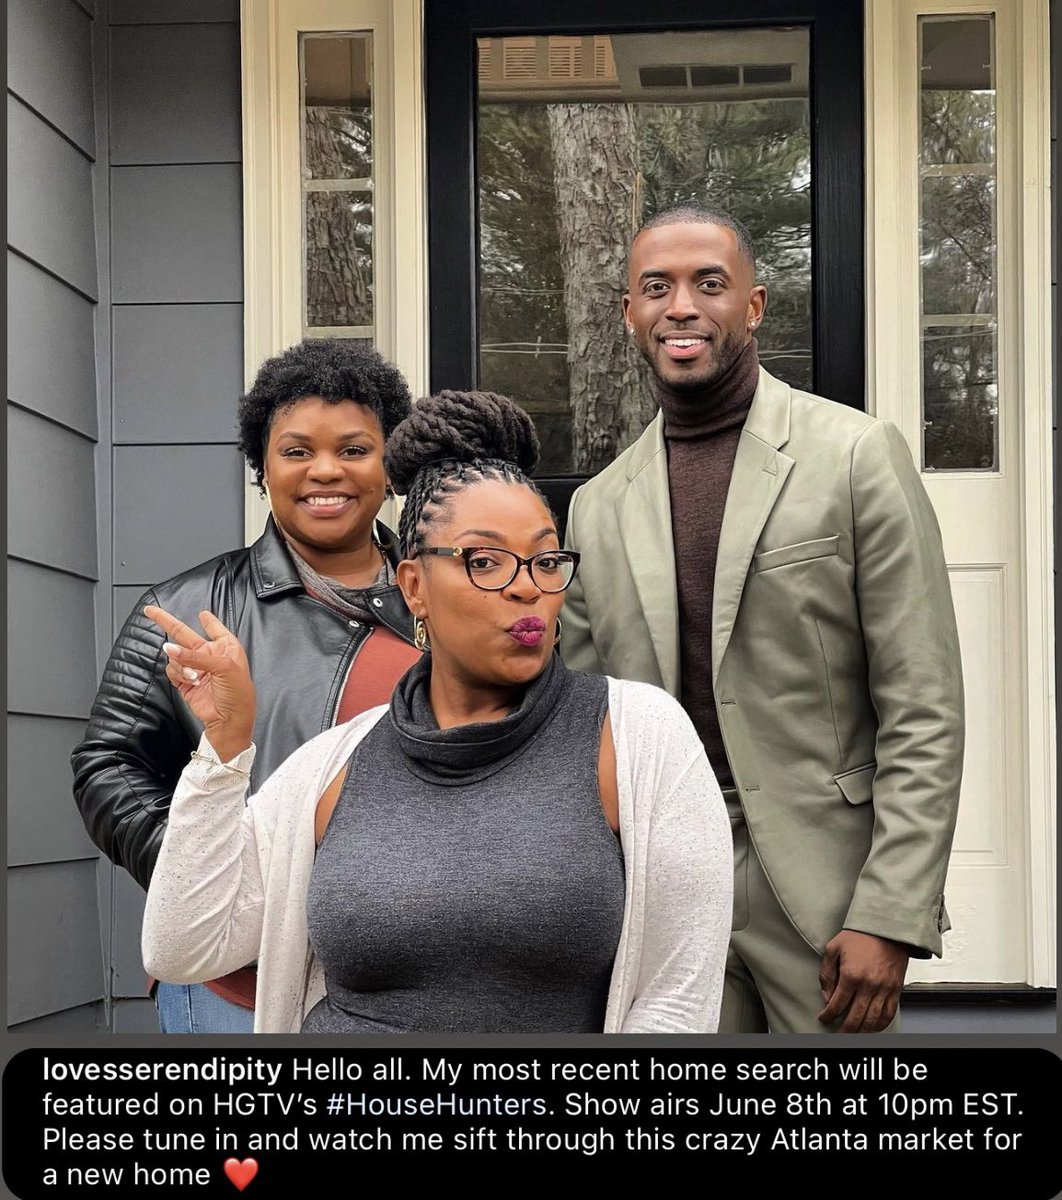 Tune into #HGTV House Hunters June 8th at 10PM EST. @hgtv captured everything that went into us finding my client the right home. It wasn’t easy but we got it done and had a lot of fun along the way too! 🏡🎬 // #kennethkyrellregroup #HouseHunters